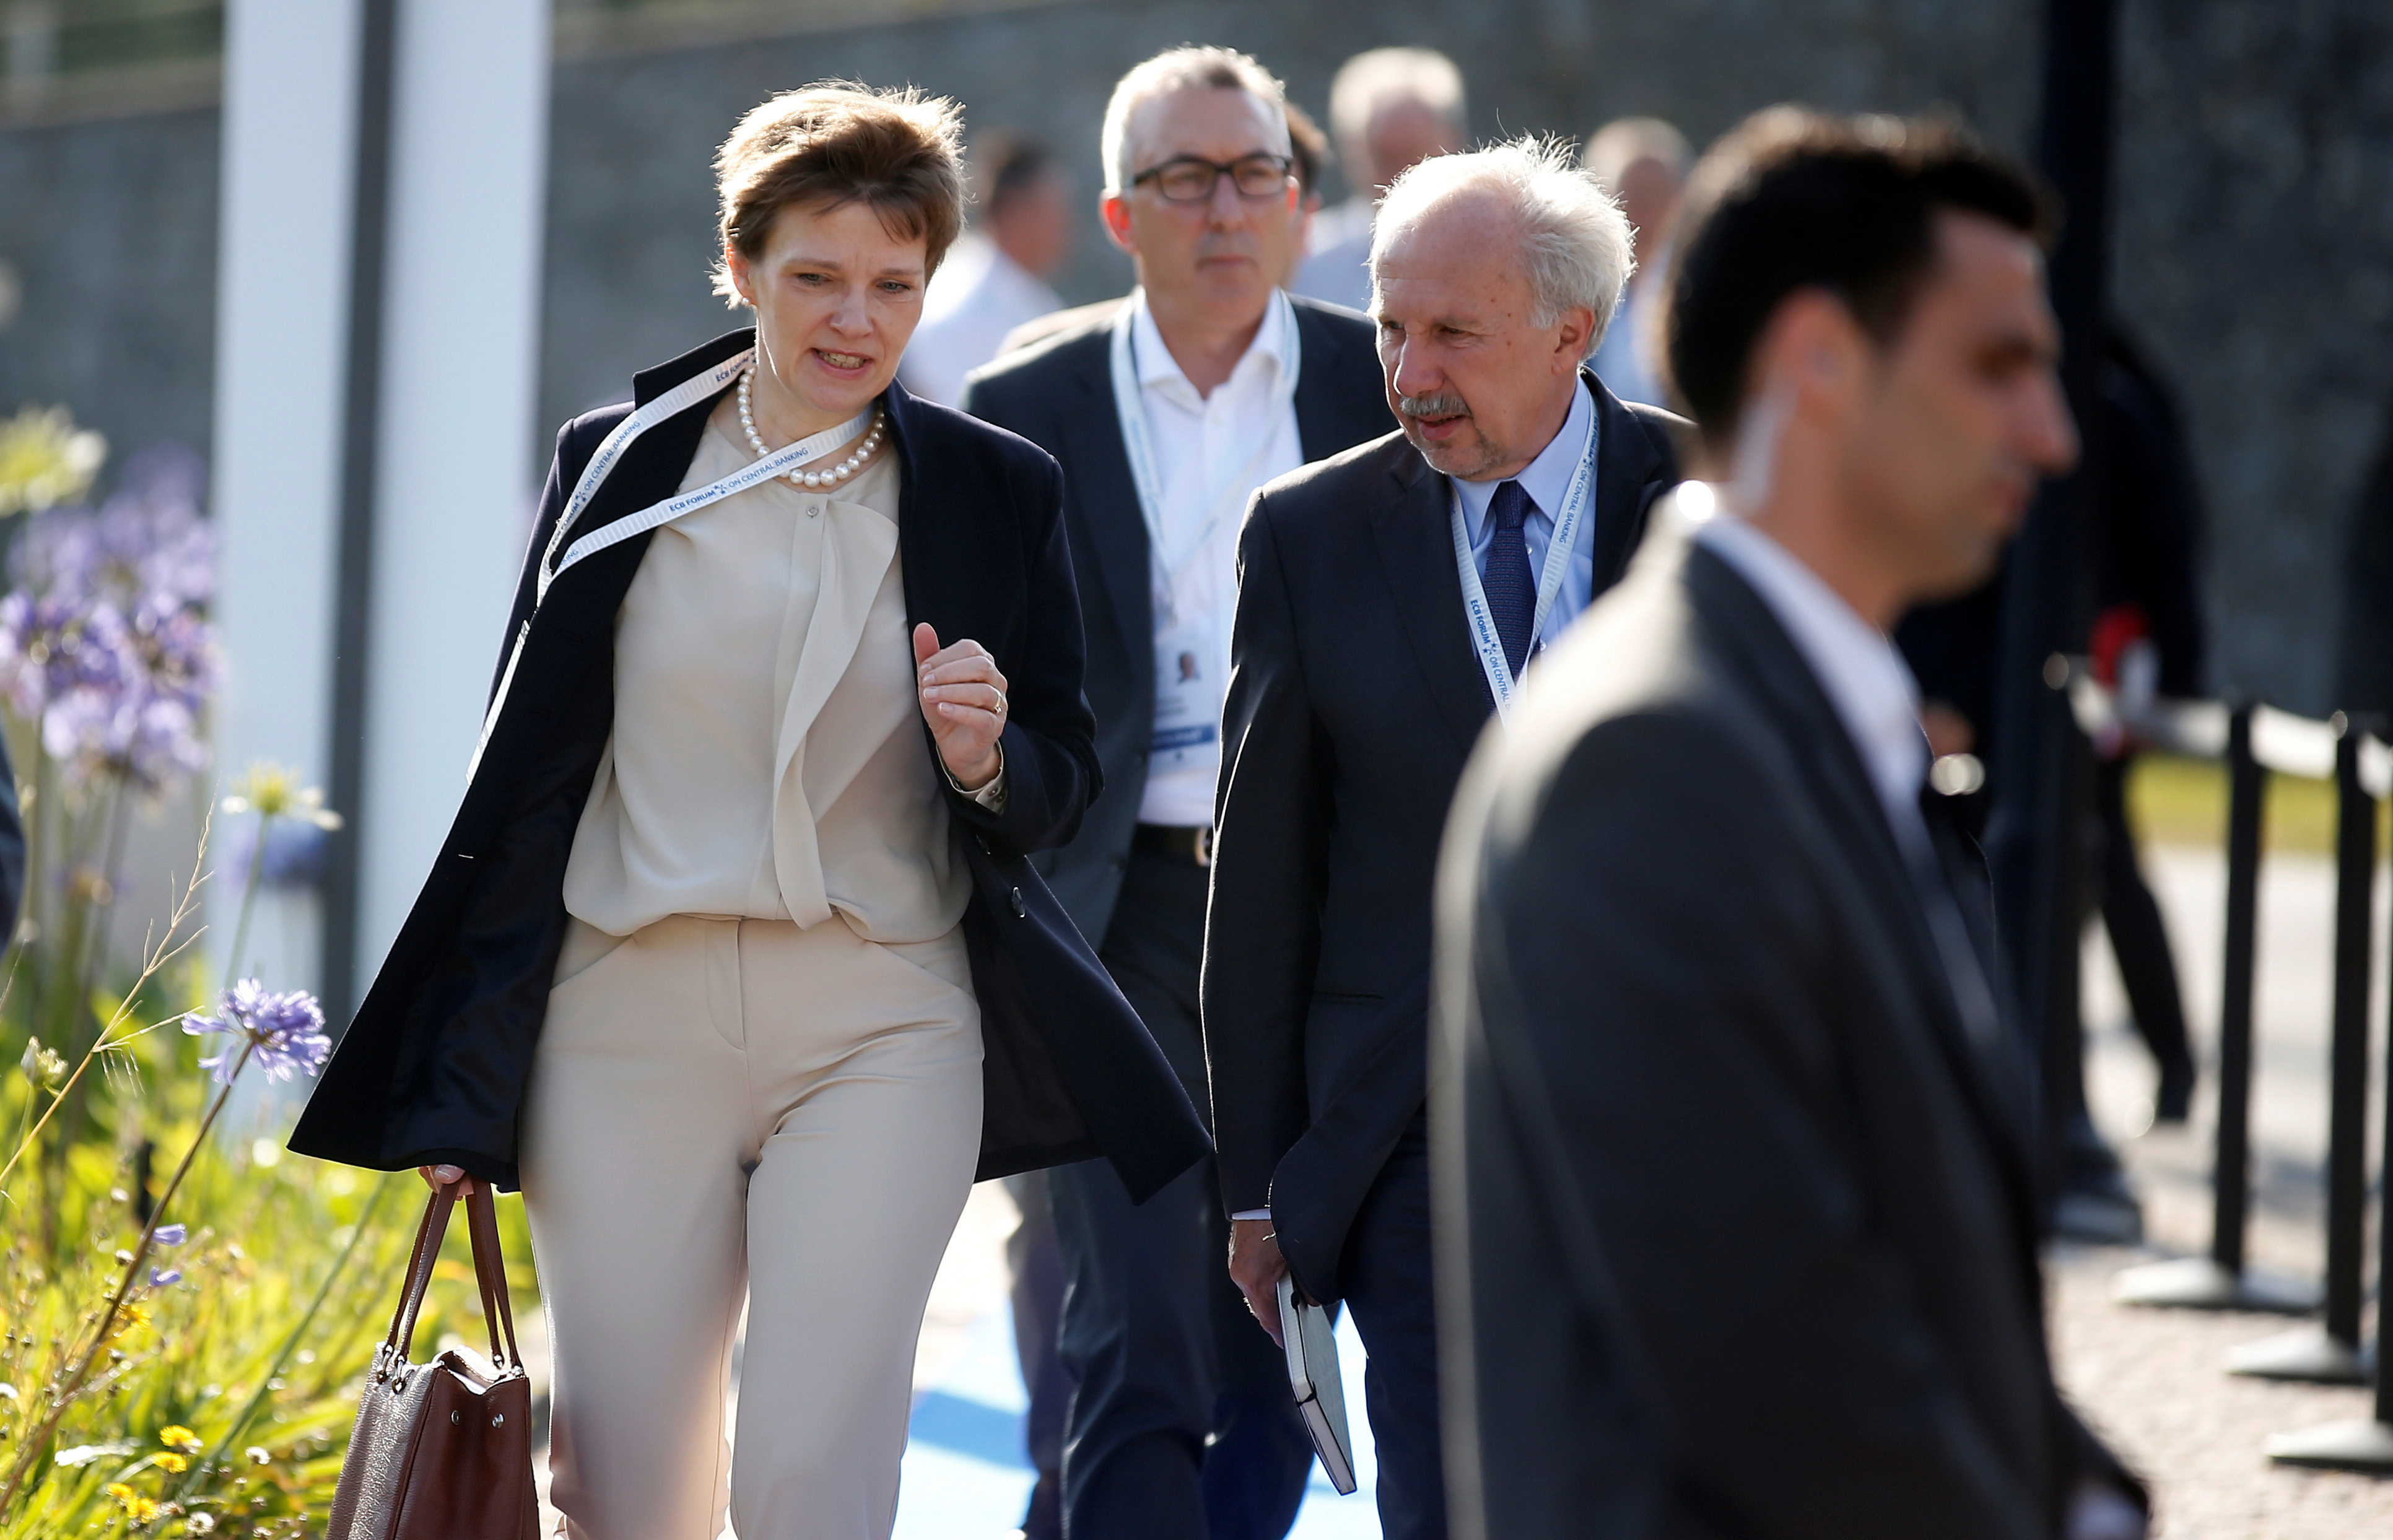 German central bank (Bundesbank) vice-president Claudia Buch arrives at the ECB Forum in Sintra